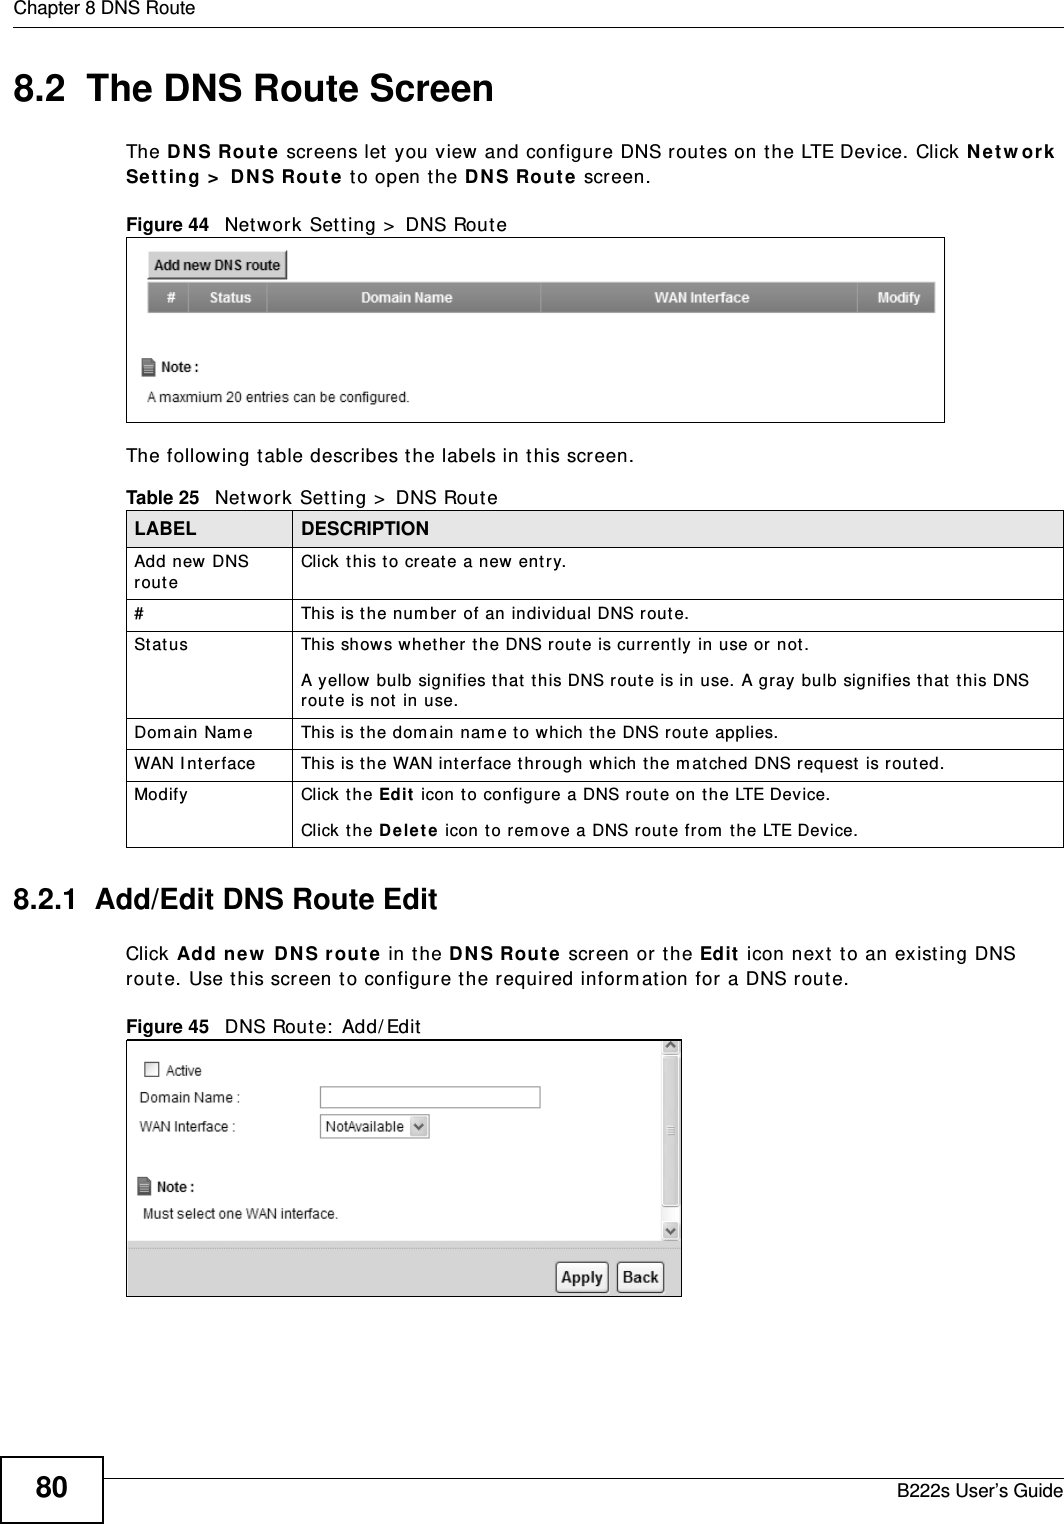 Chapter 8 DNS RouteB222s User’s Guide808.2  The DNS Route ScreenThe DN S Rou t e screens let  you view and configure DNS rout es on t he LTE Device. Click N et w or k  Set t ing &gt;  D NS Rout e t o open t he D N S Rout e screen. Figure 44   Net work Set ting &gt;  DNS Rout eThe following t able describes t he labels in t his screen. 8.2.1  Add/Edit DNS Route Edit  Click Add ne w  DN S r out e  in t he DN S Rou t e screen or t he Ed it  icon next t o an exist ing DNS rout e. Use t his screen t o configure t he required inform at ion for  a DNS route. Figure 45   DNS Route:  Add/ Edit  Table 25   Network Sett ing &gt;  DNS RouteLABEL DESCRIPTIONAdd new DNS routeClick t his t o creat e a new entr y.#This is t he num ber of an individual DNS route.St atus This shows whether t he DNS rout e is currently in use or not .A yellow bulb signifies t hat  t his DNS route is in use. A gray bulb signifies t hat t his DNS route is not in use.Dom ain Nam e This is t he dom ain nam e t o which t he DNS rout e applies. WAN I nt erface This is t he WAN int erface t hrough which t he m atched DNS request  is routed. Modify Click the Ed it  icon to configure a DNS route on t he LTE Device.Click t he D e le t e icon t o rem ove a DNS rout e from  t he LTE Device. 